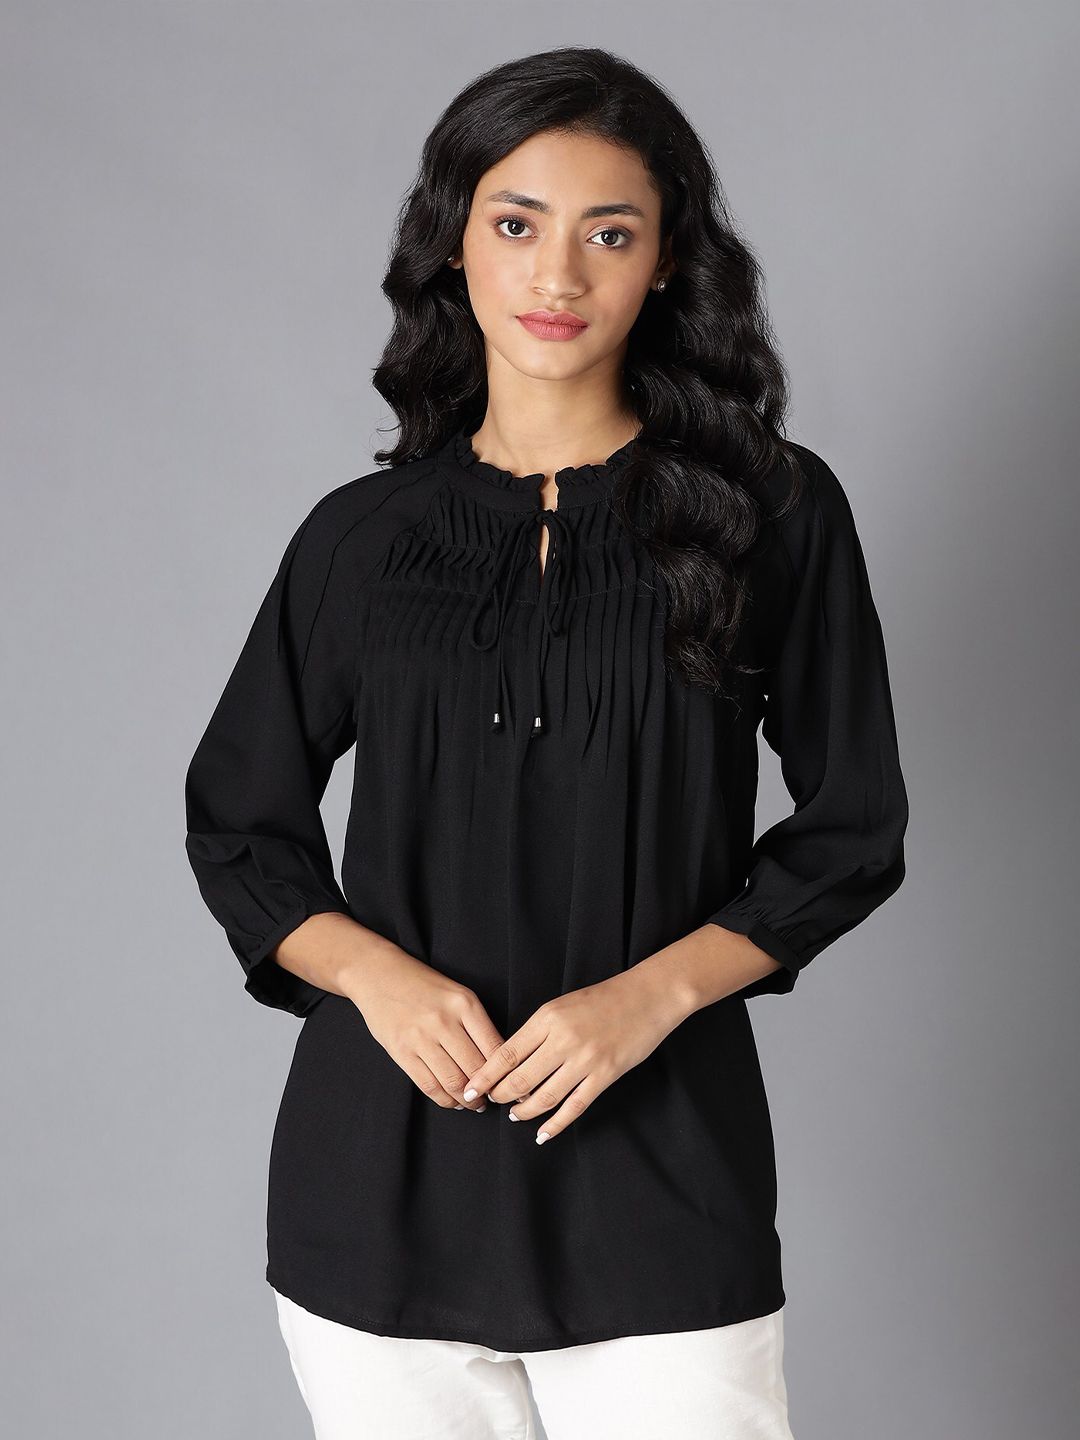 W Black Solid Tie-Up Neck Top Price in India